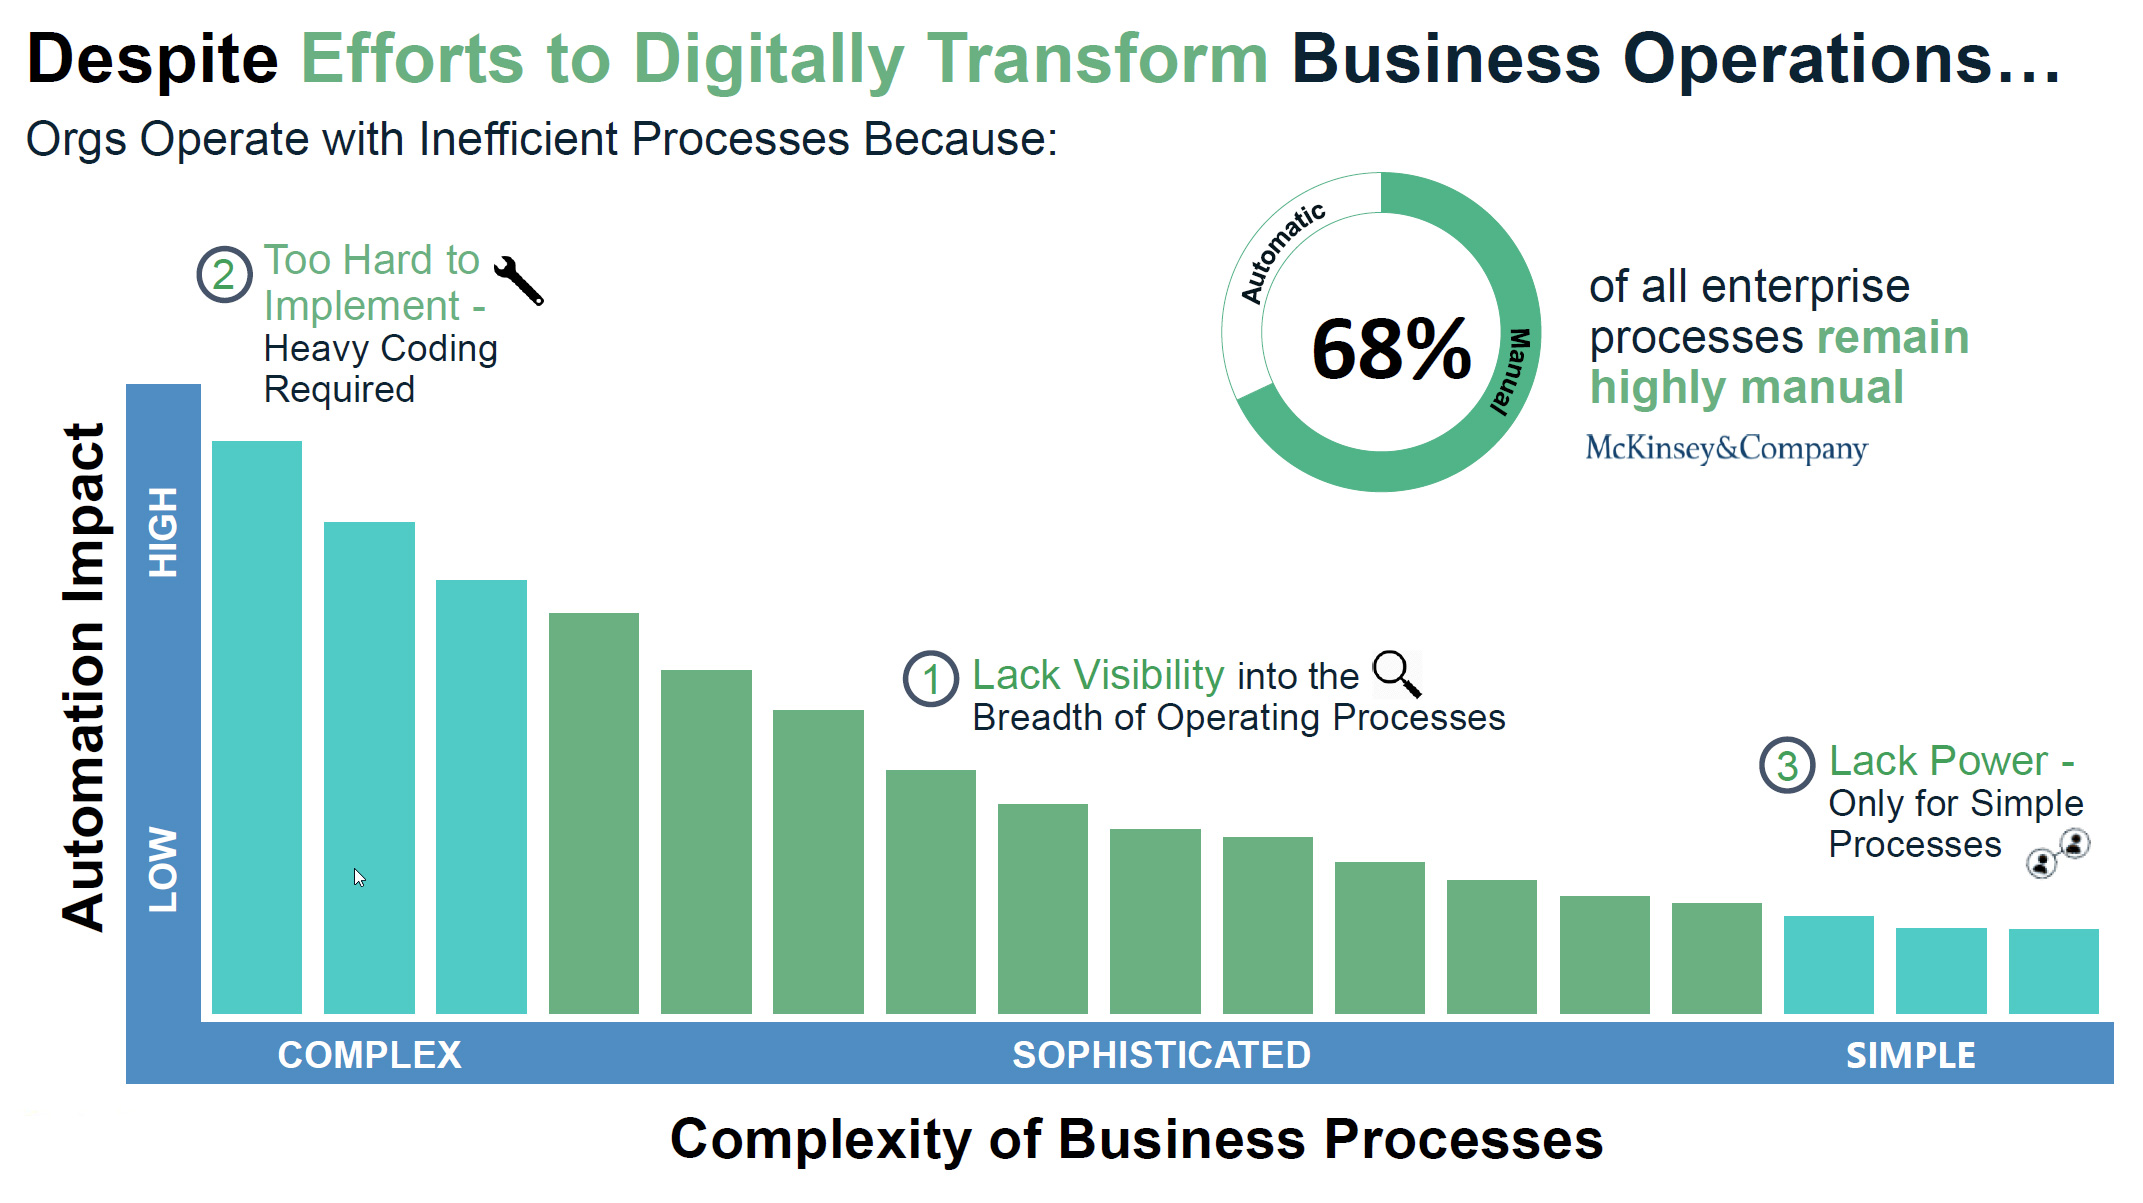 68% of all enterprise processes still remain highly manual